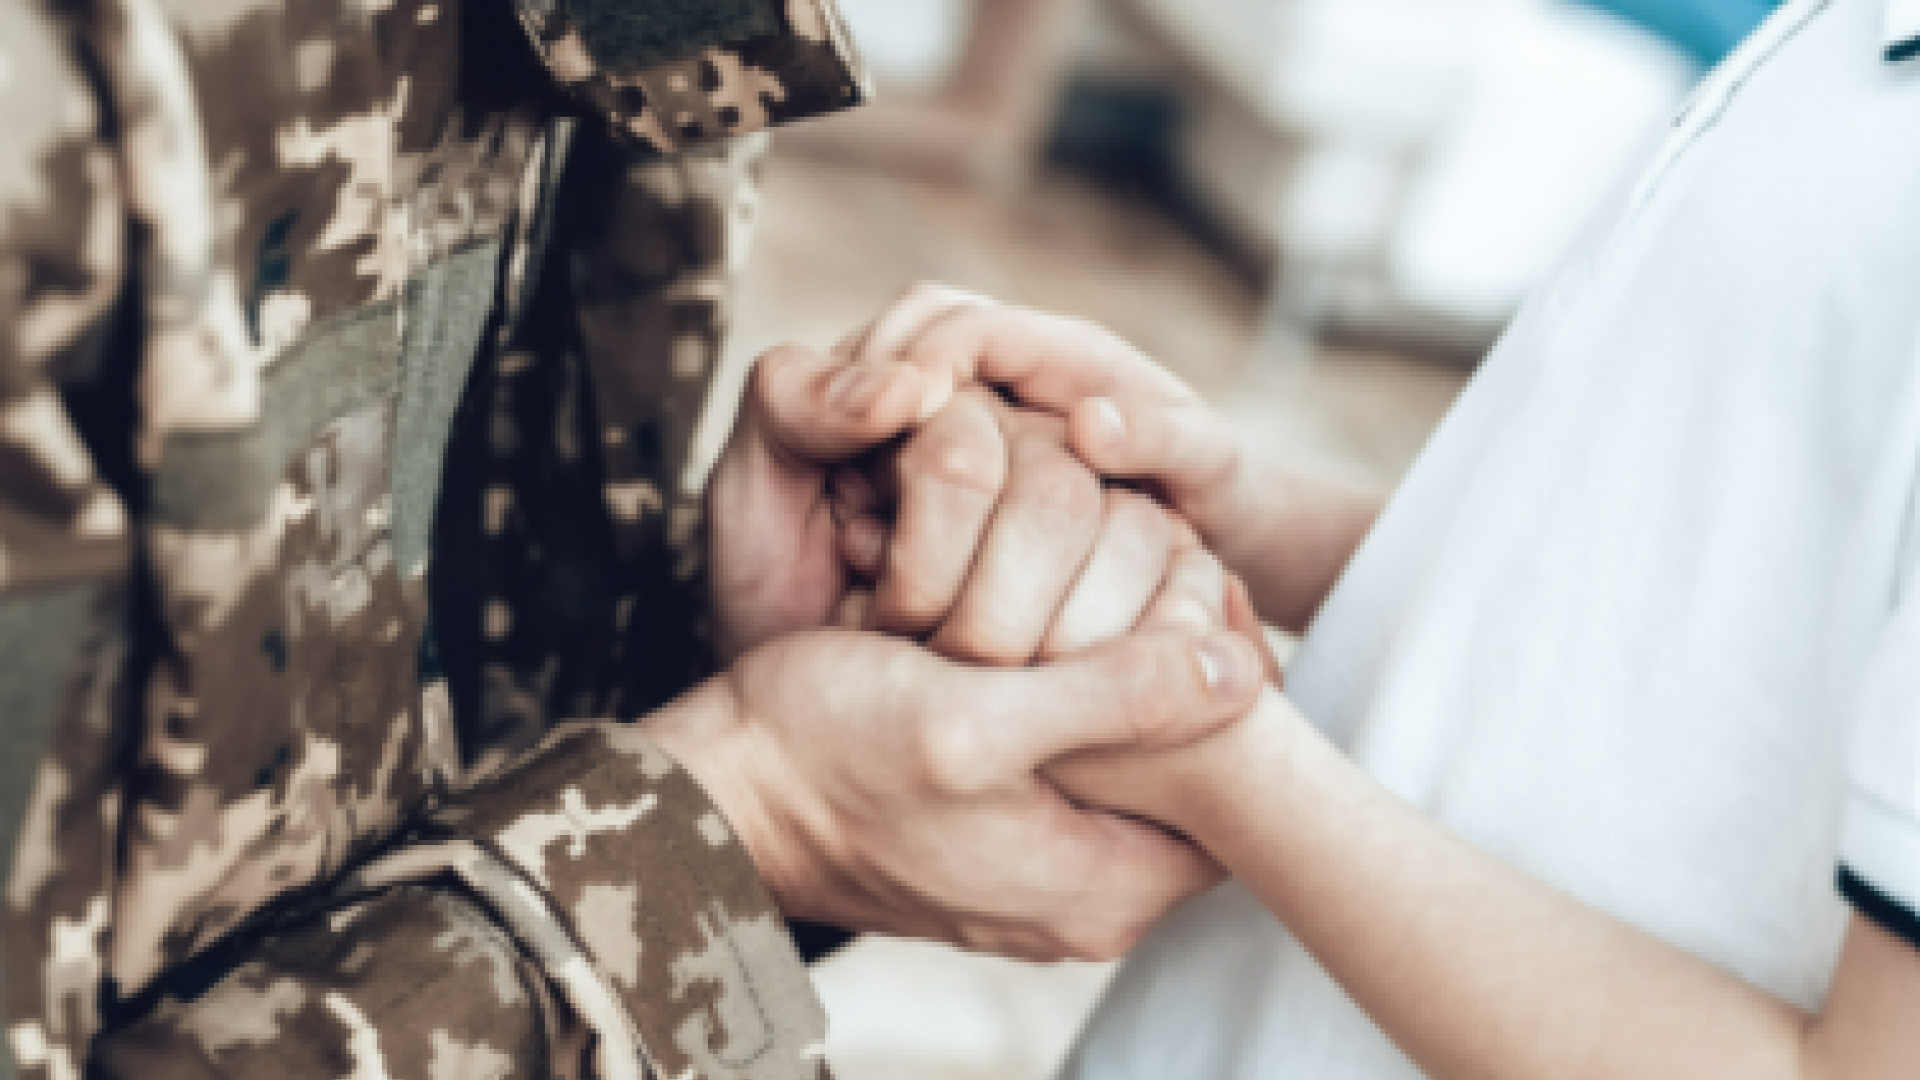 active duty military holding civilians hands 